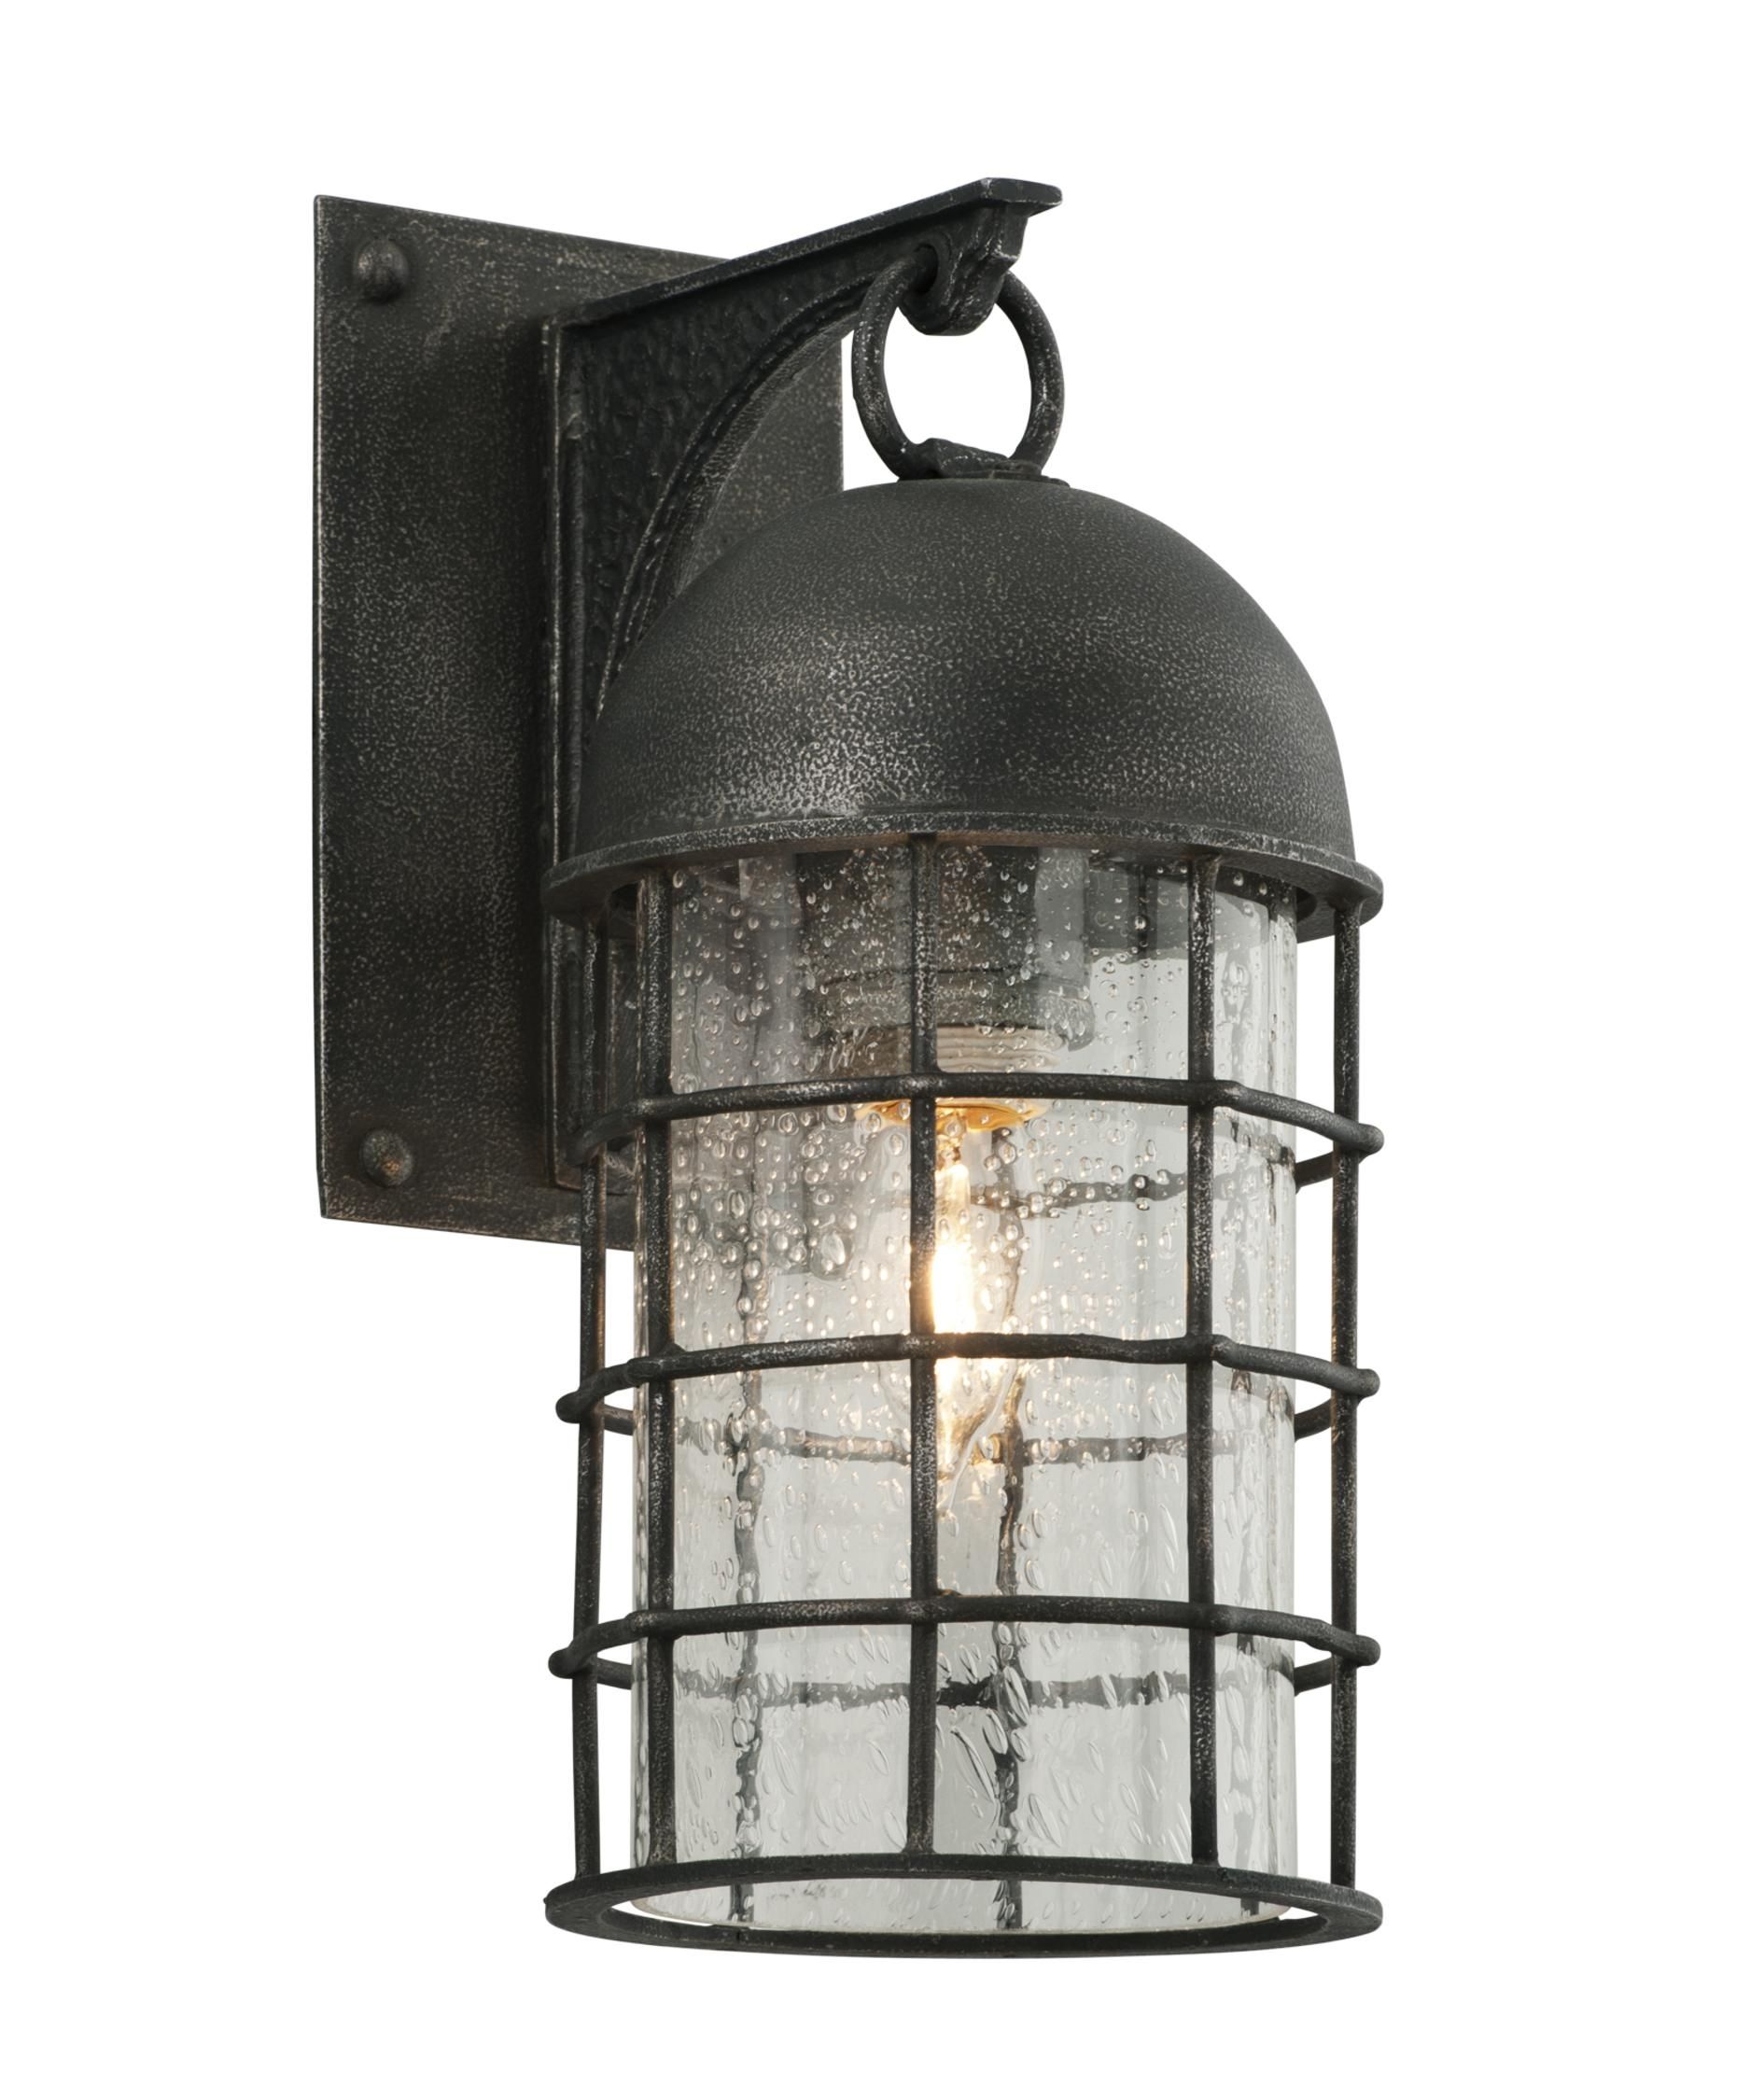 Outdoor : Outdoor Cylinder Wall Sconce Up Down Lights Exterior Light With Regard To Outdoor Wall Mounted Accent Lighting (View 10 of 15)